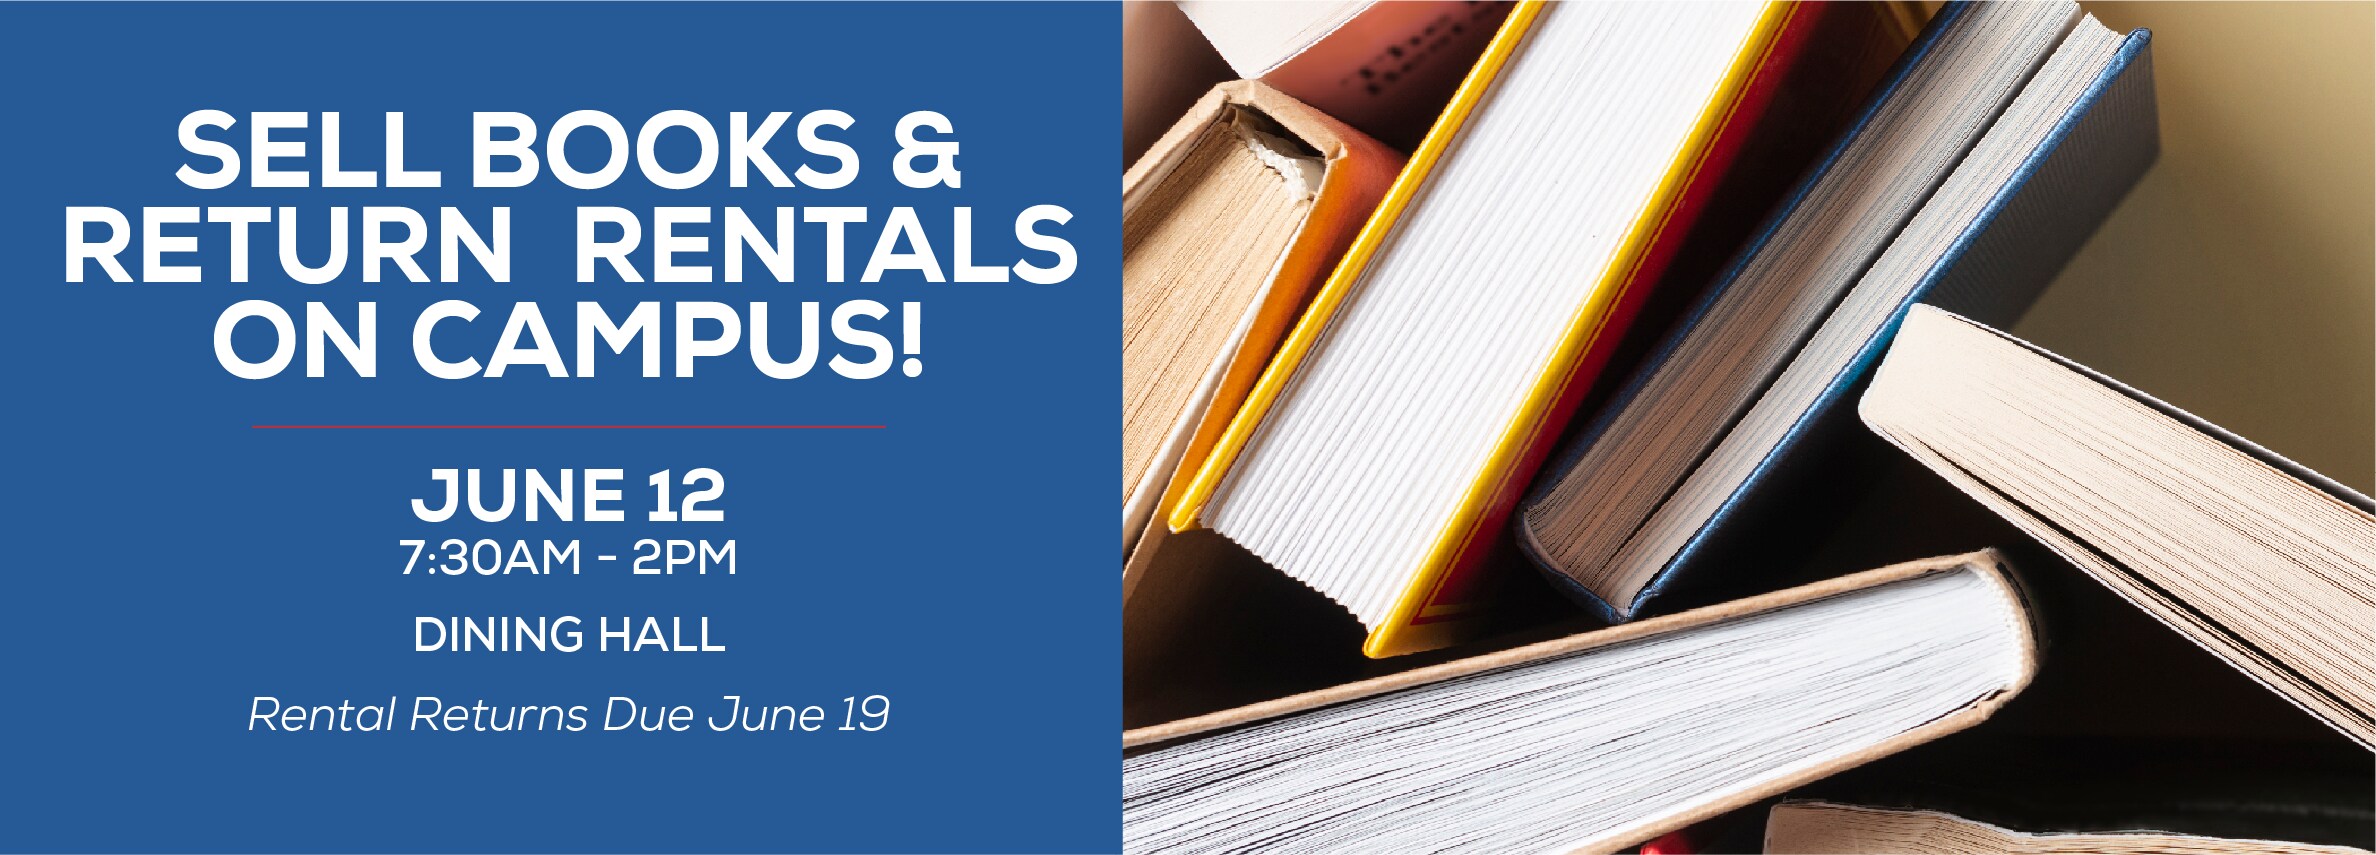 Sell your books and return your rentals on campus! June 12 7:30am - 2pm in the Dining Hall. Rental returns due June 19